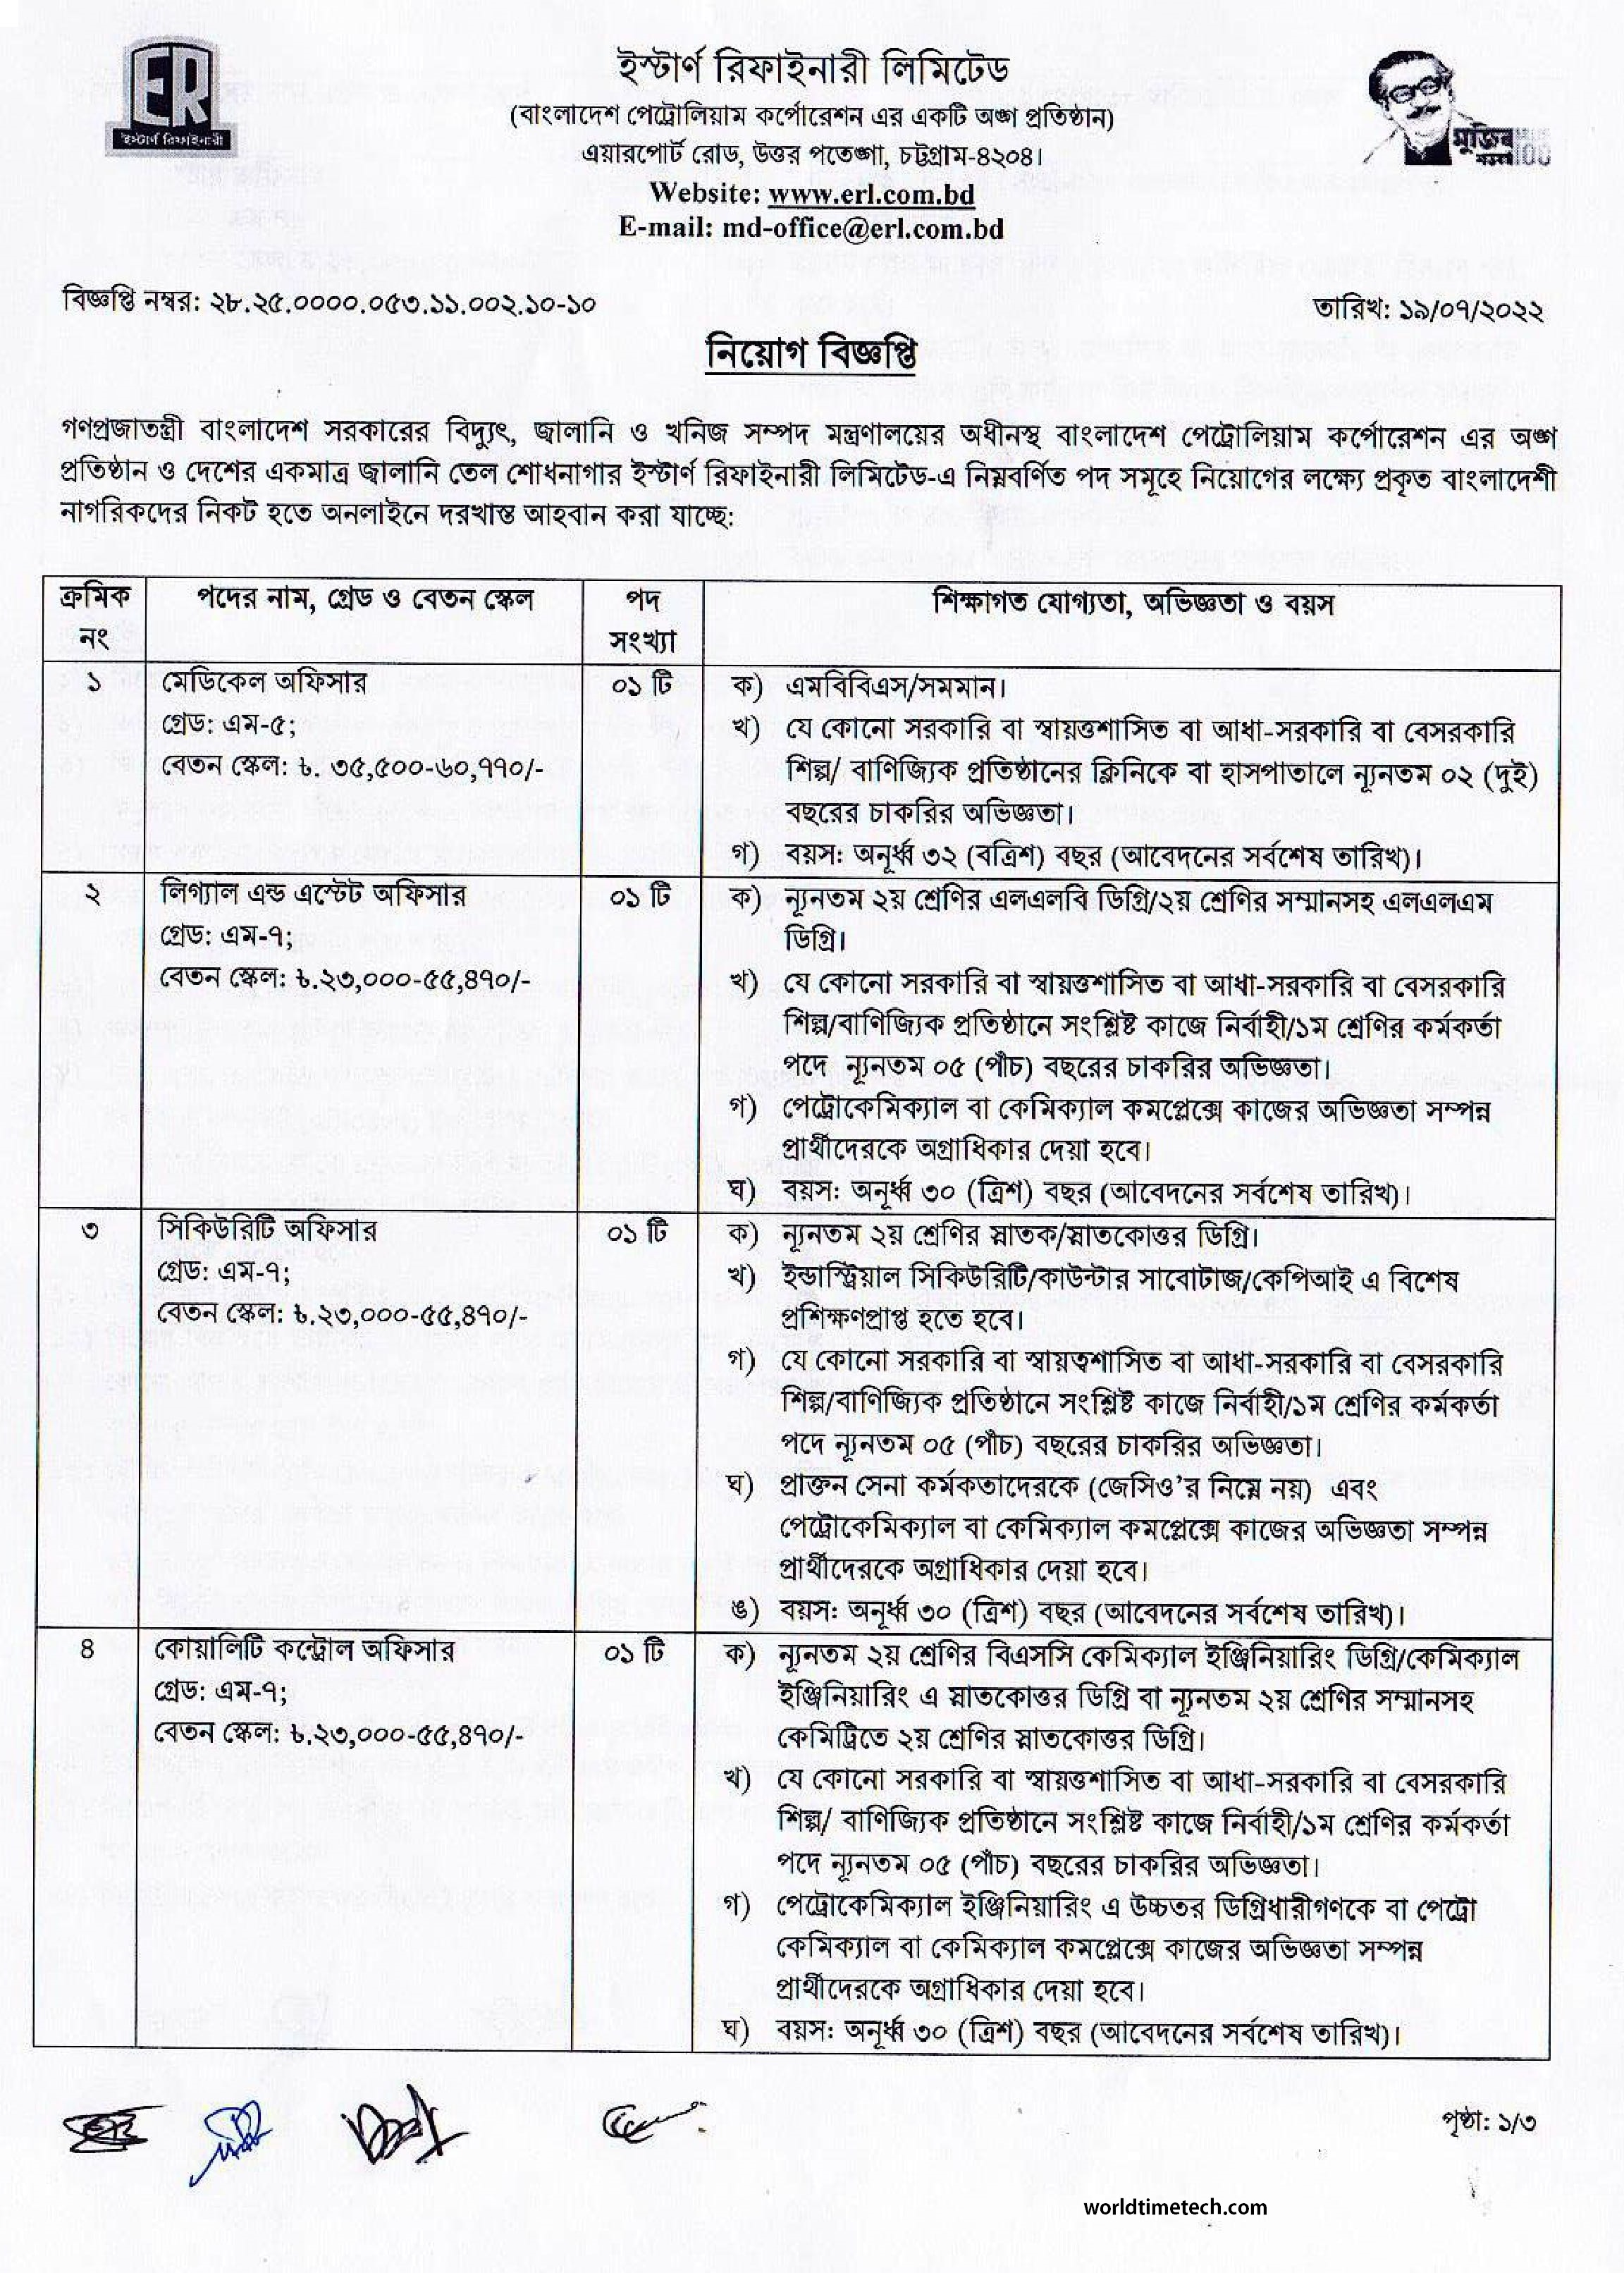 eastern-refinery-limited-job-circular-2022-part-1